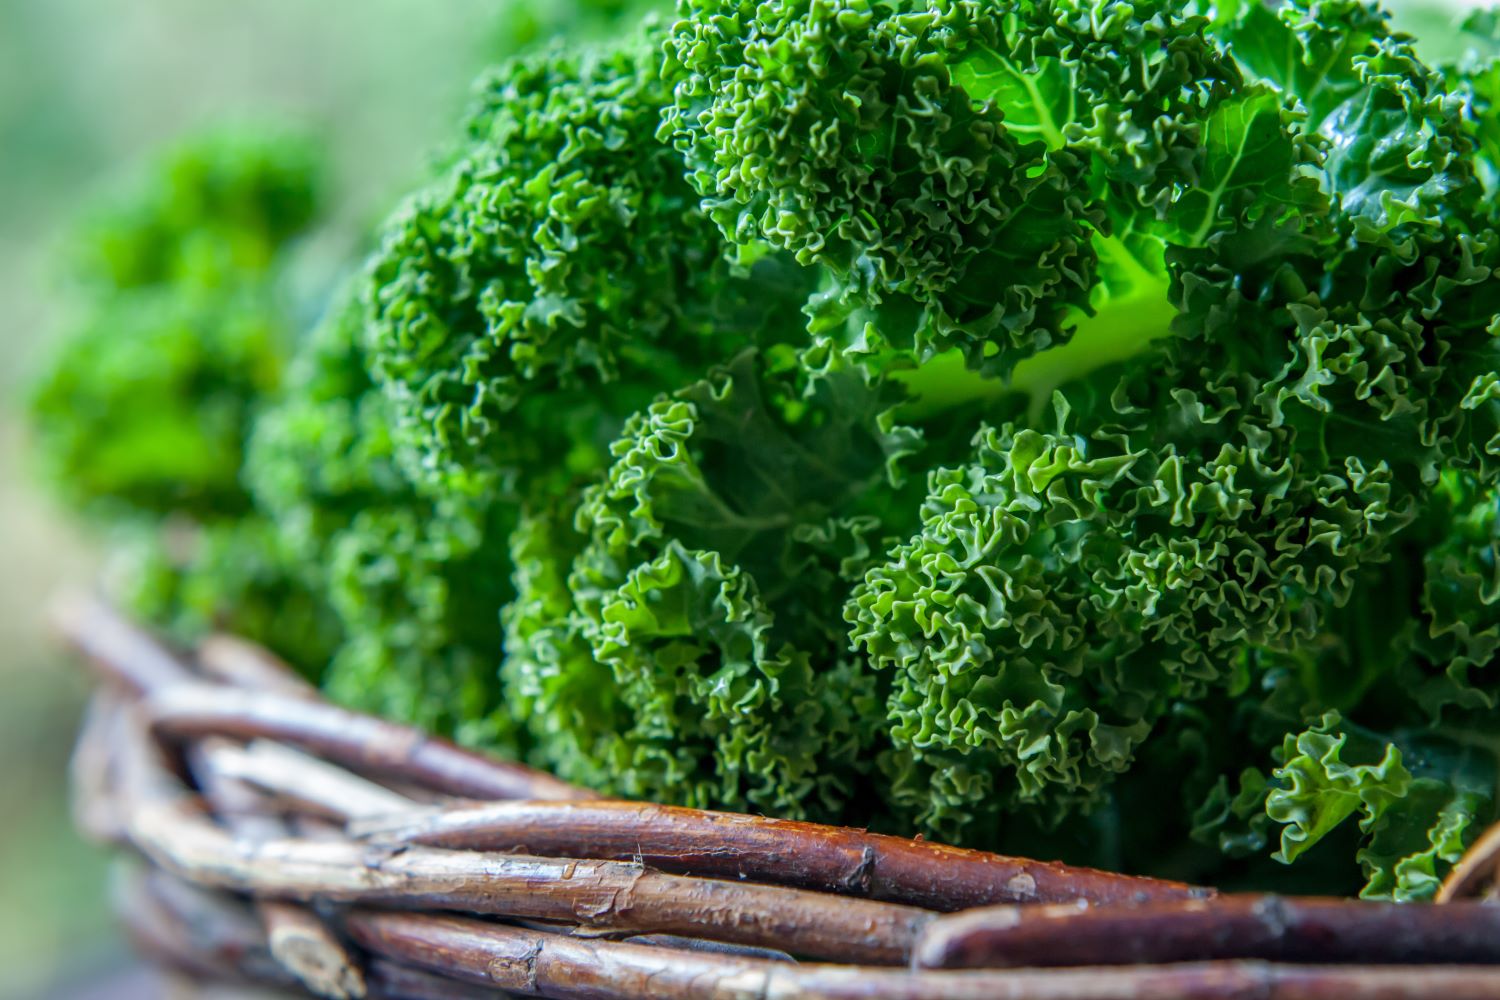 Kale: History, Benefits, and Risks - HubPages